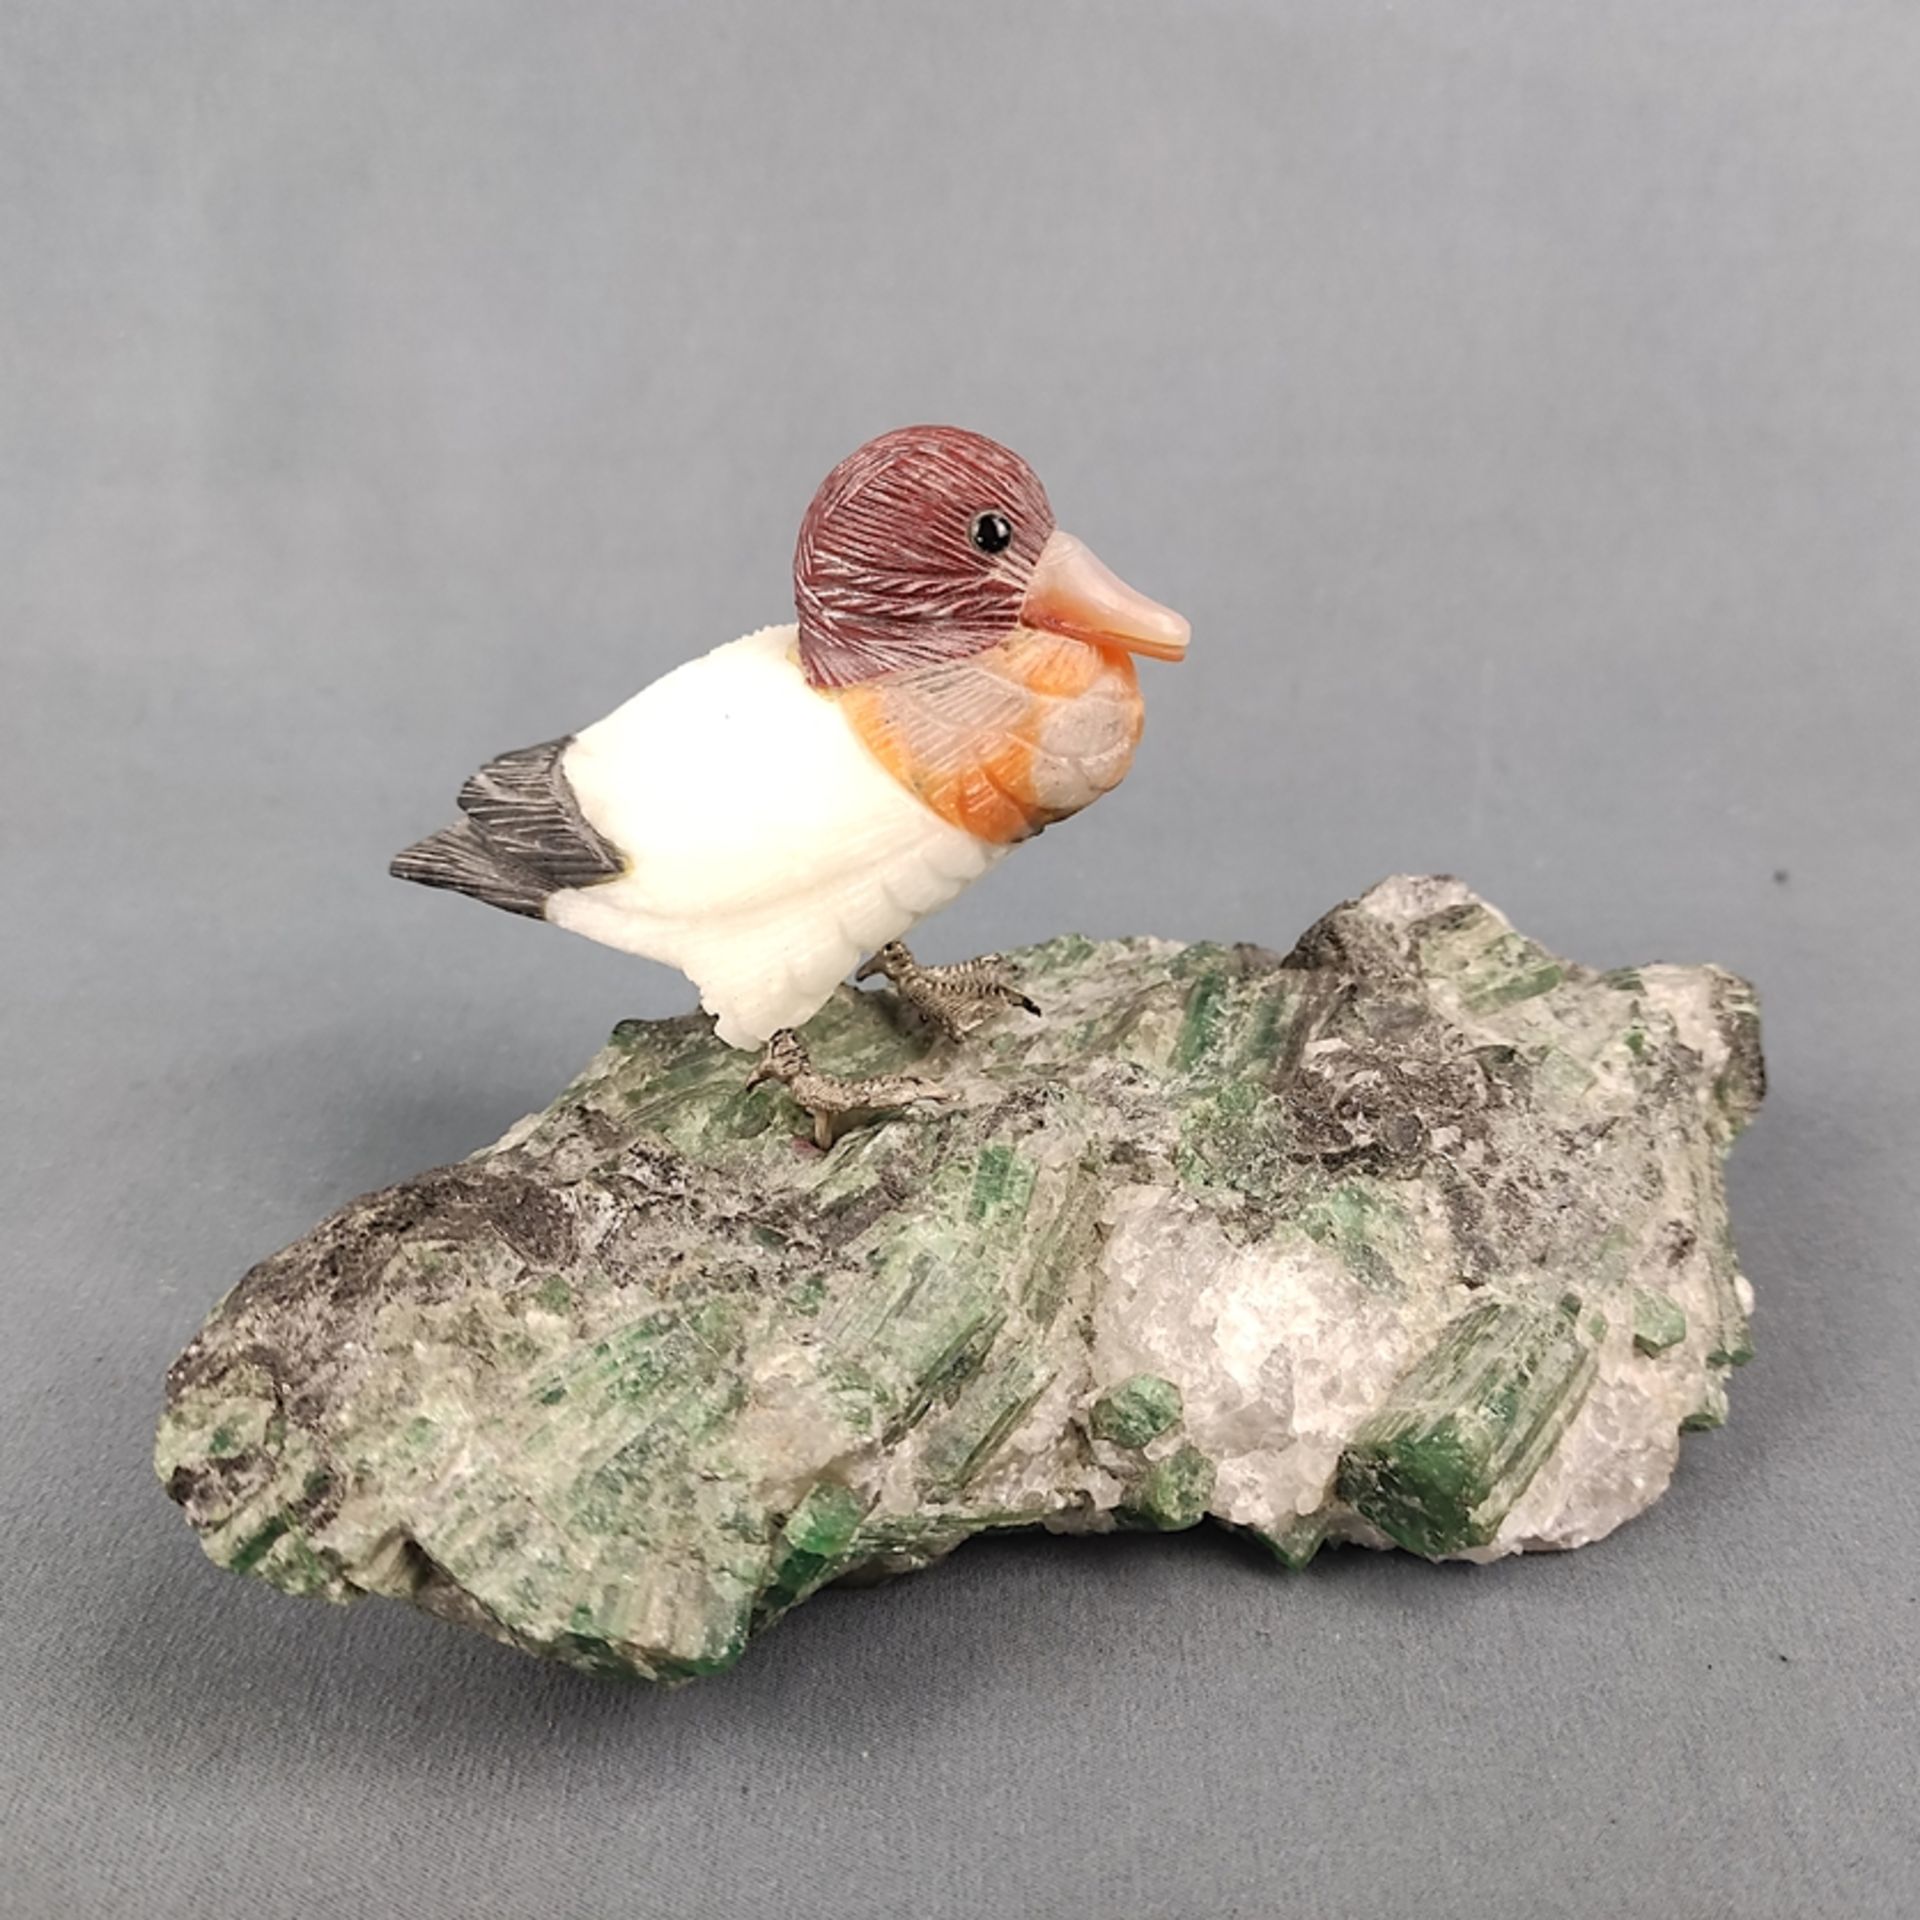 3 birds made of semi-precious stones, consisting of "toucan" sitting on rock crystal, height 6.5cm, - Image 2 of 7